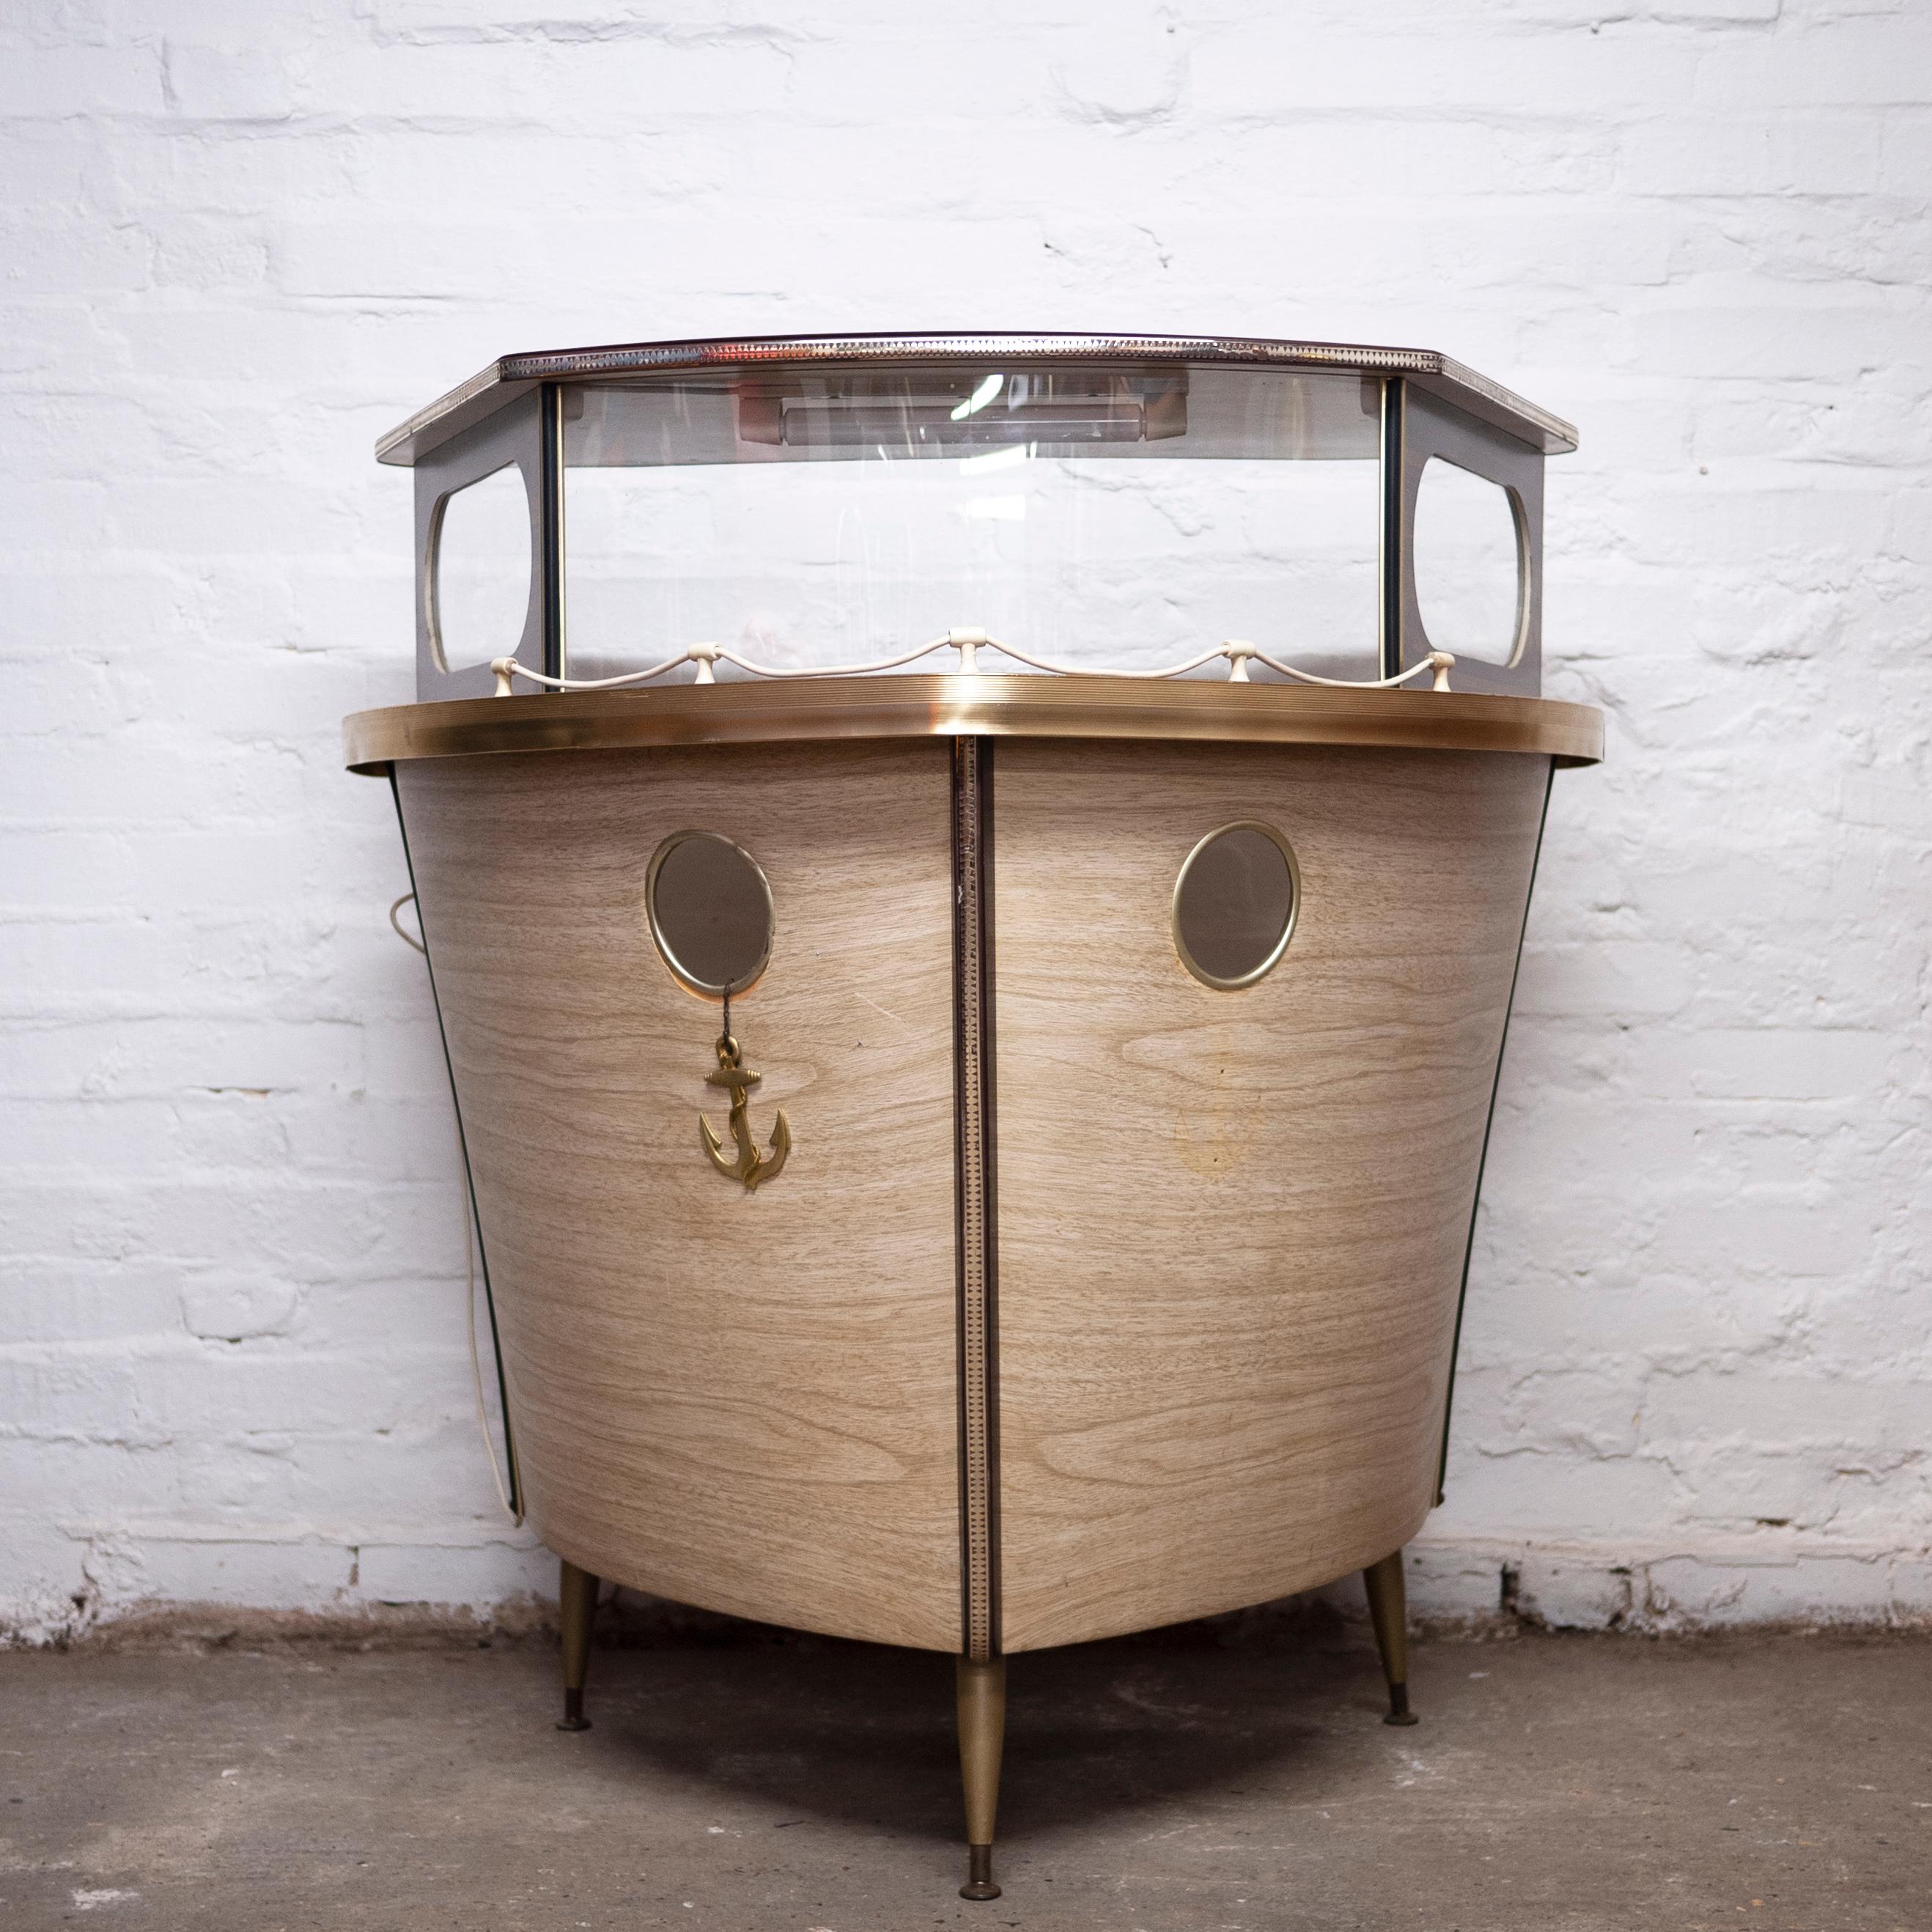 Mid-20th Century Vintage Light Up Boat Cocktail Bar with Anchor, 1950s For Sale